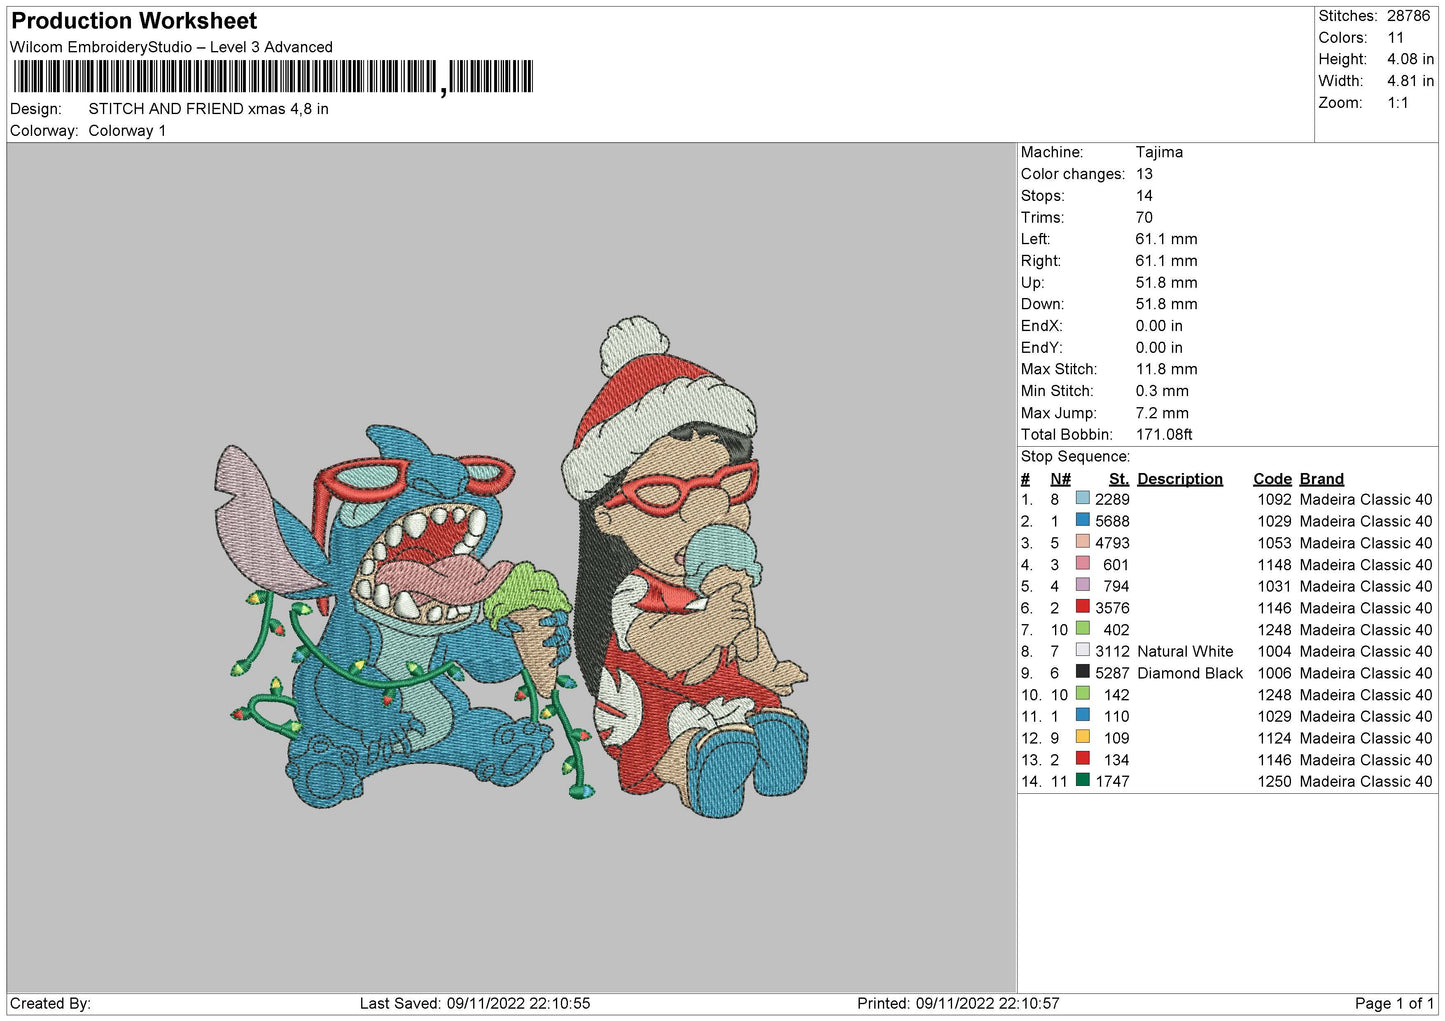 Stitch And Friends Xmas Emmbroidery File 6 sizes